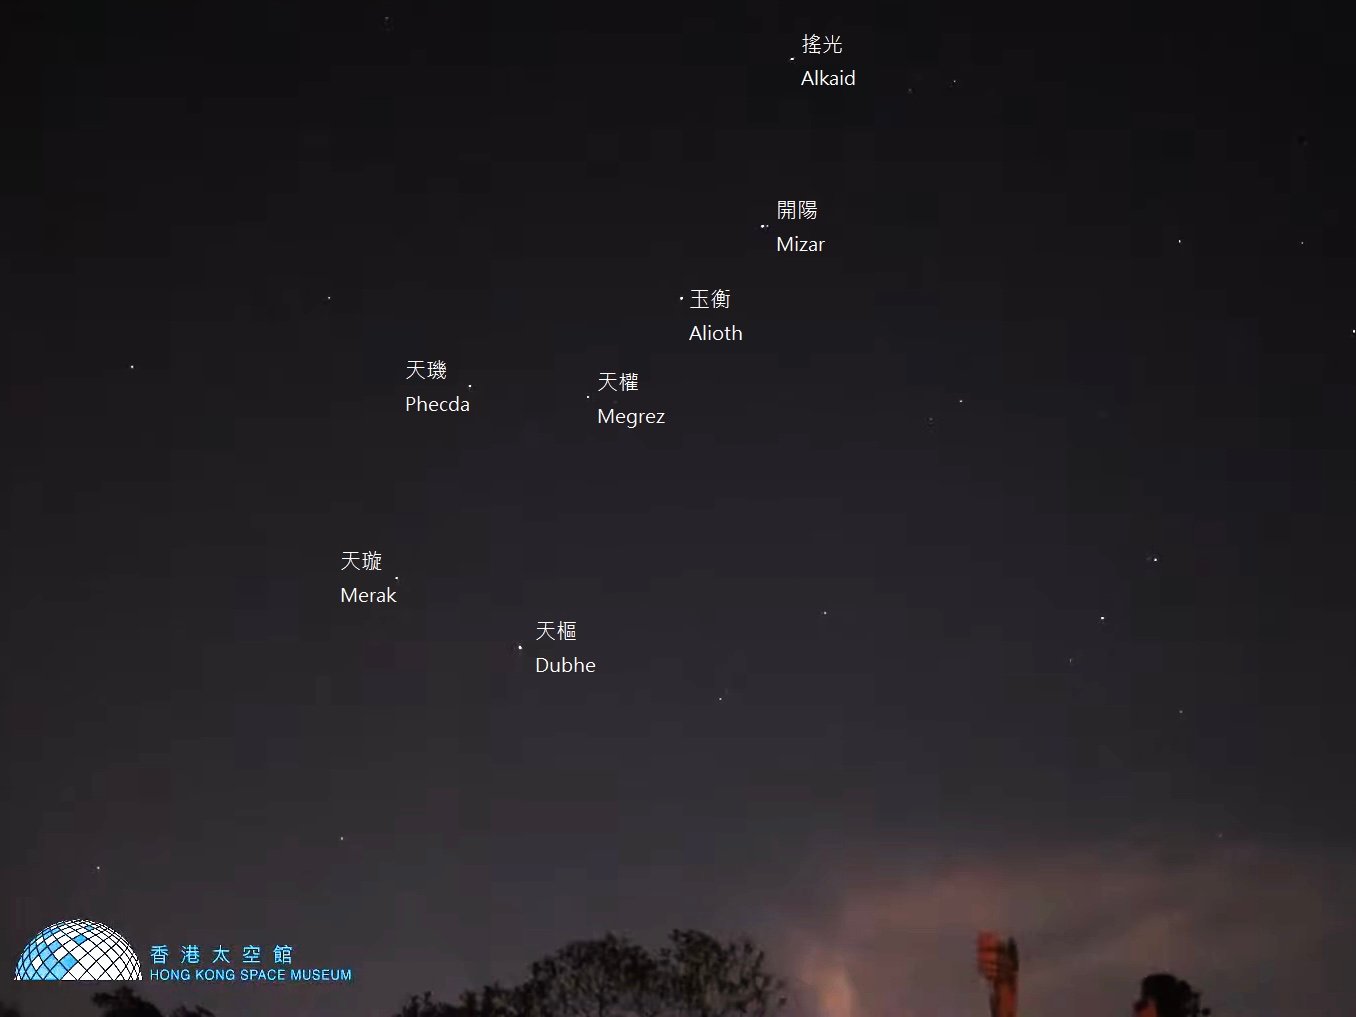 The Big Dipper – A Pointer in the Sky